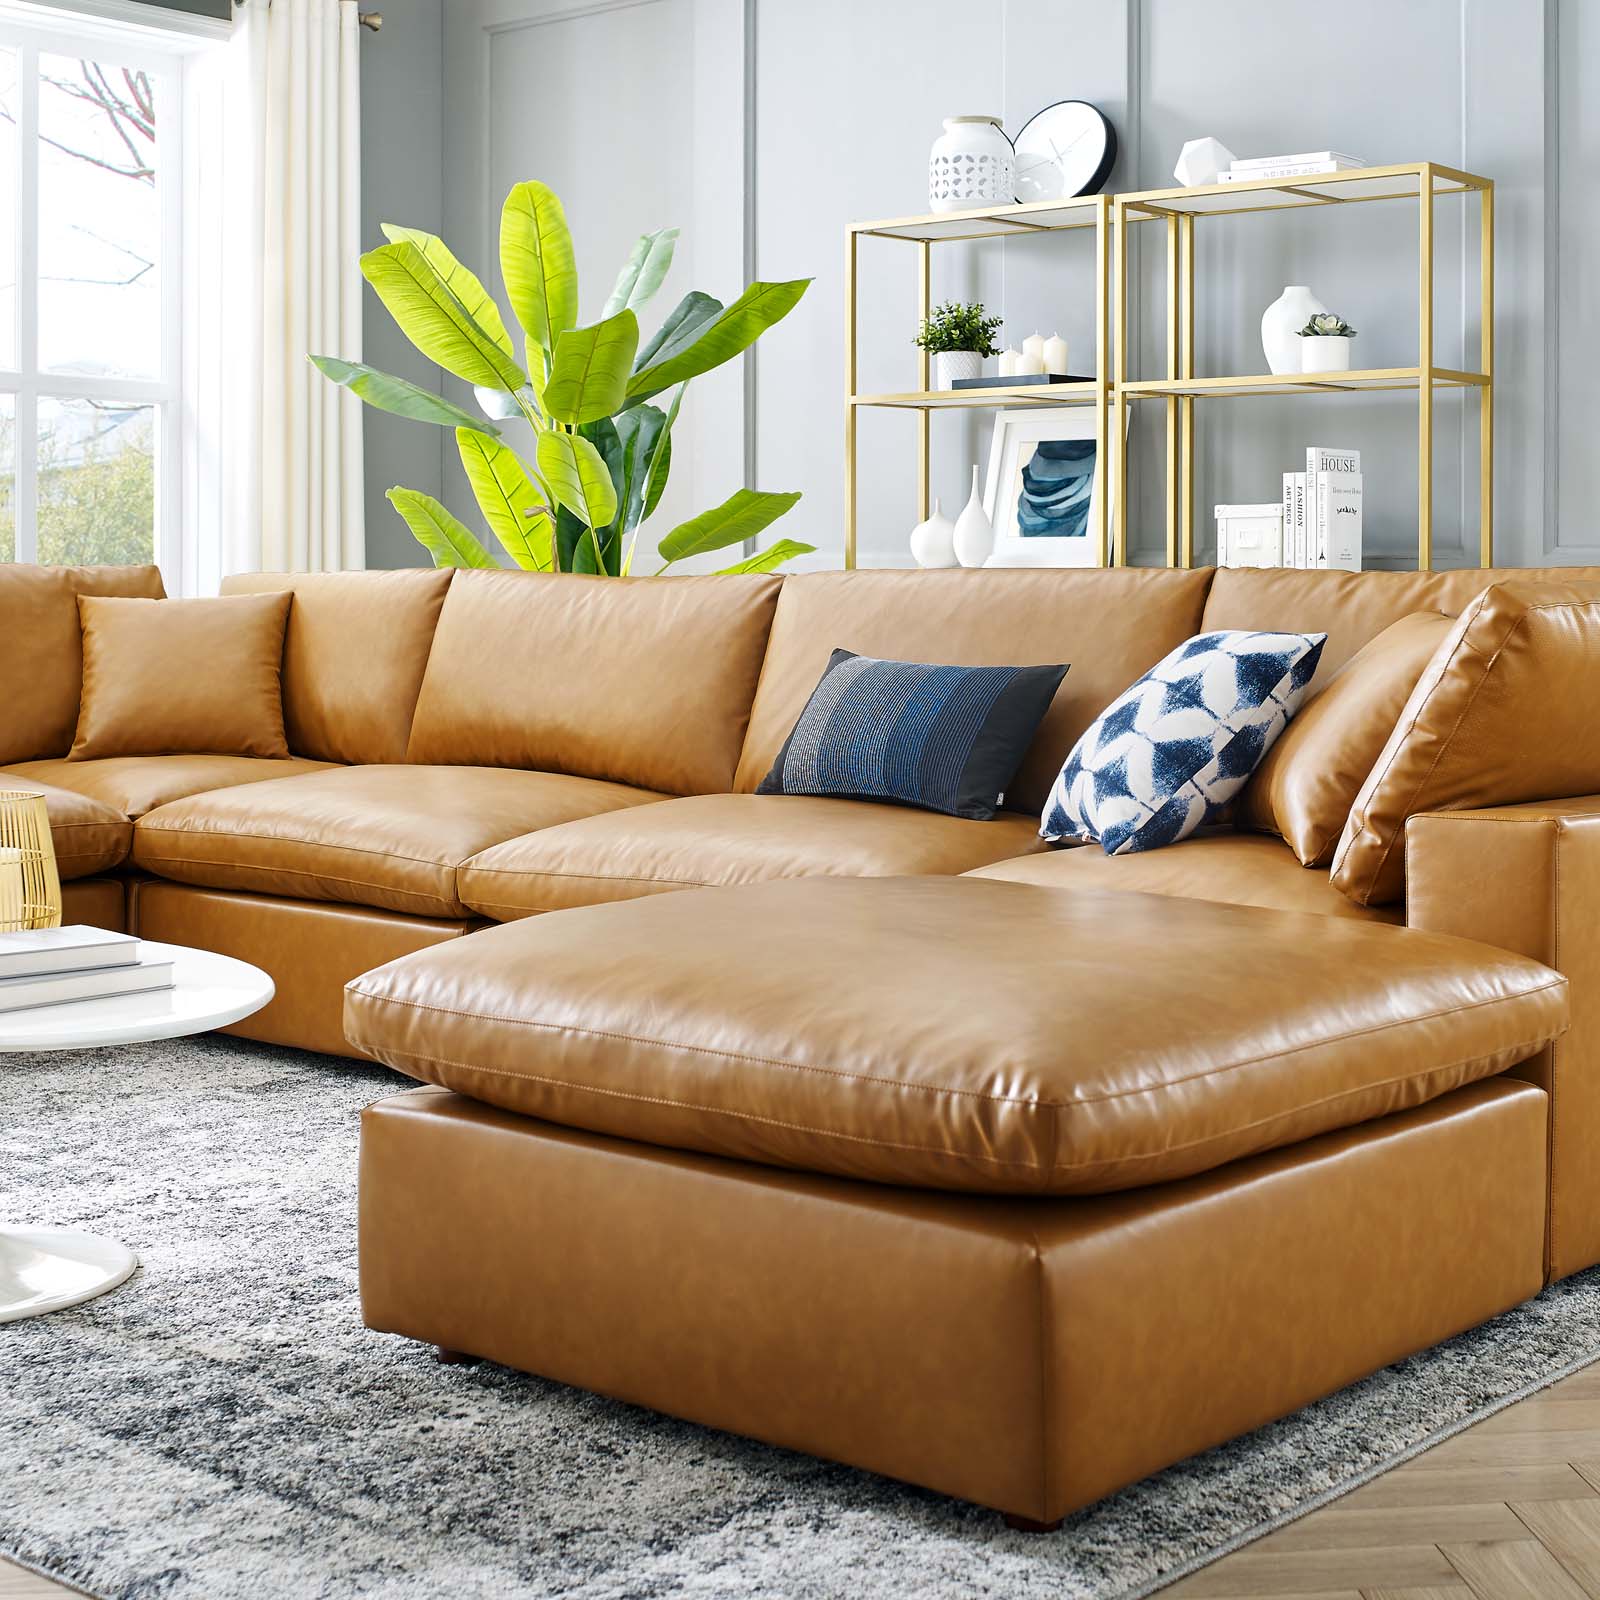 Modway Sectional Sofas - Commix Down Filled Overstuffed Vegan Leather 7 Piece Sectional Sofa Tan